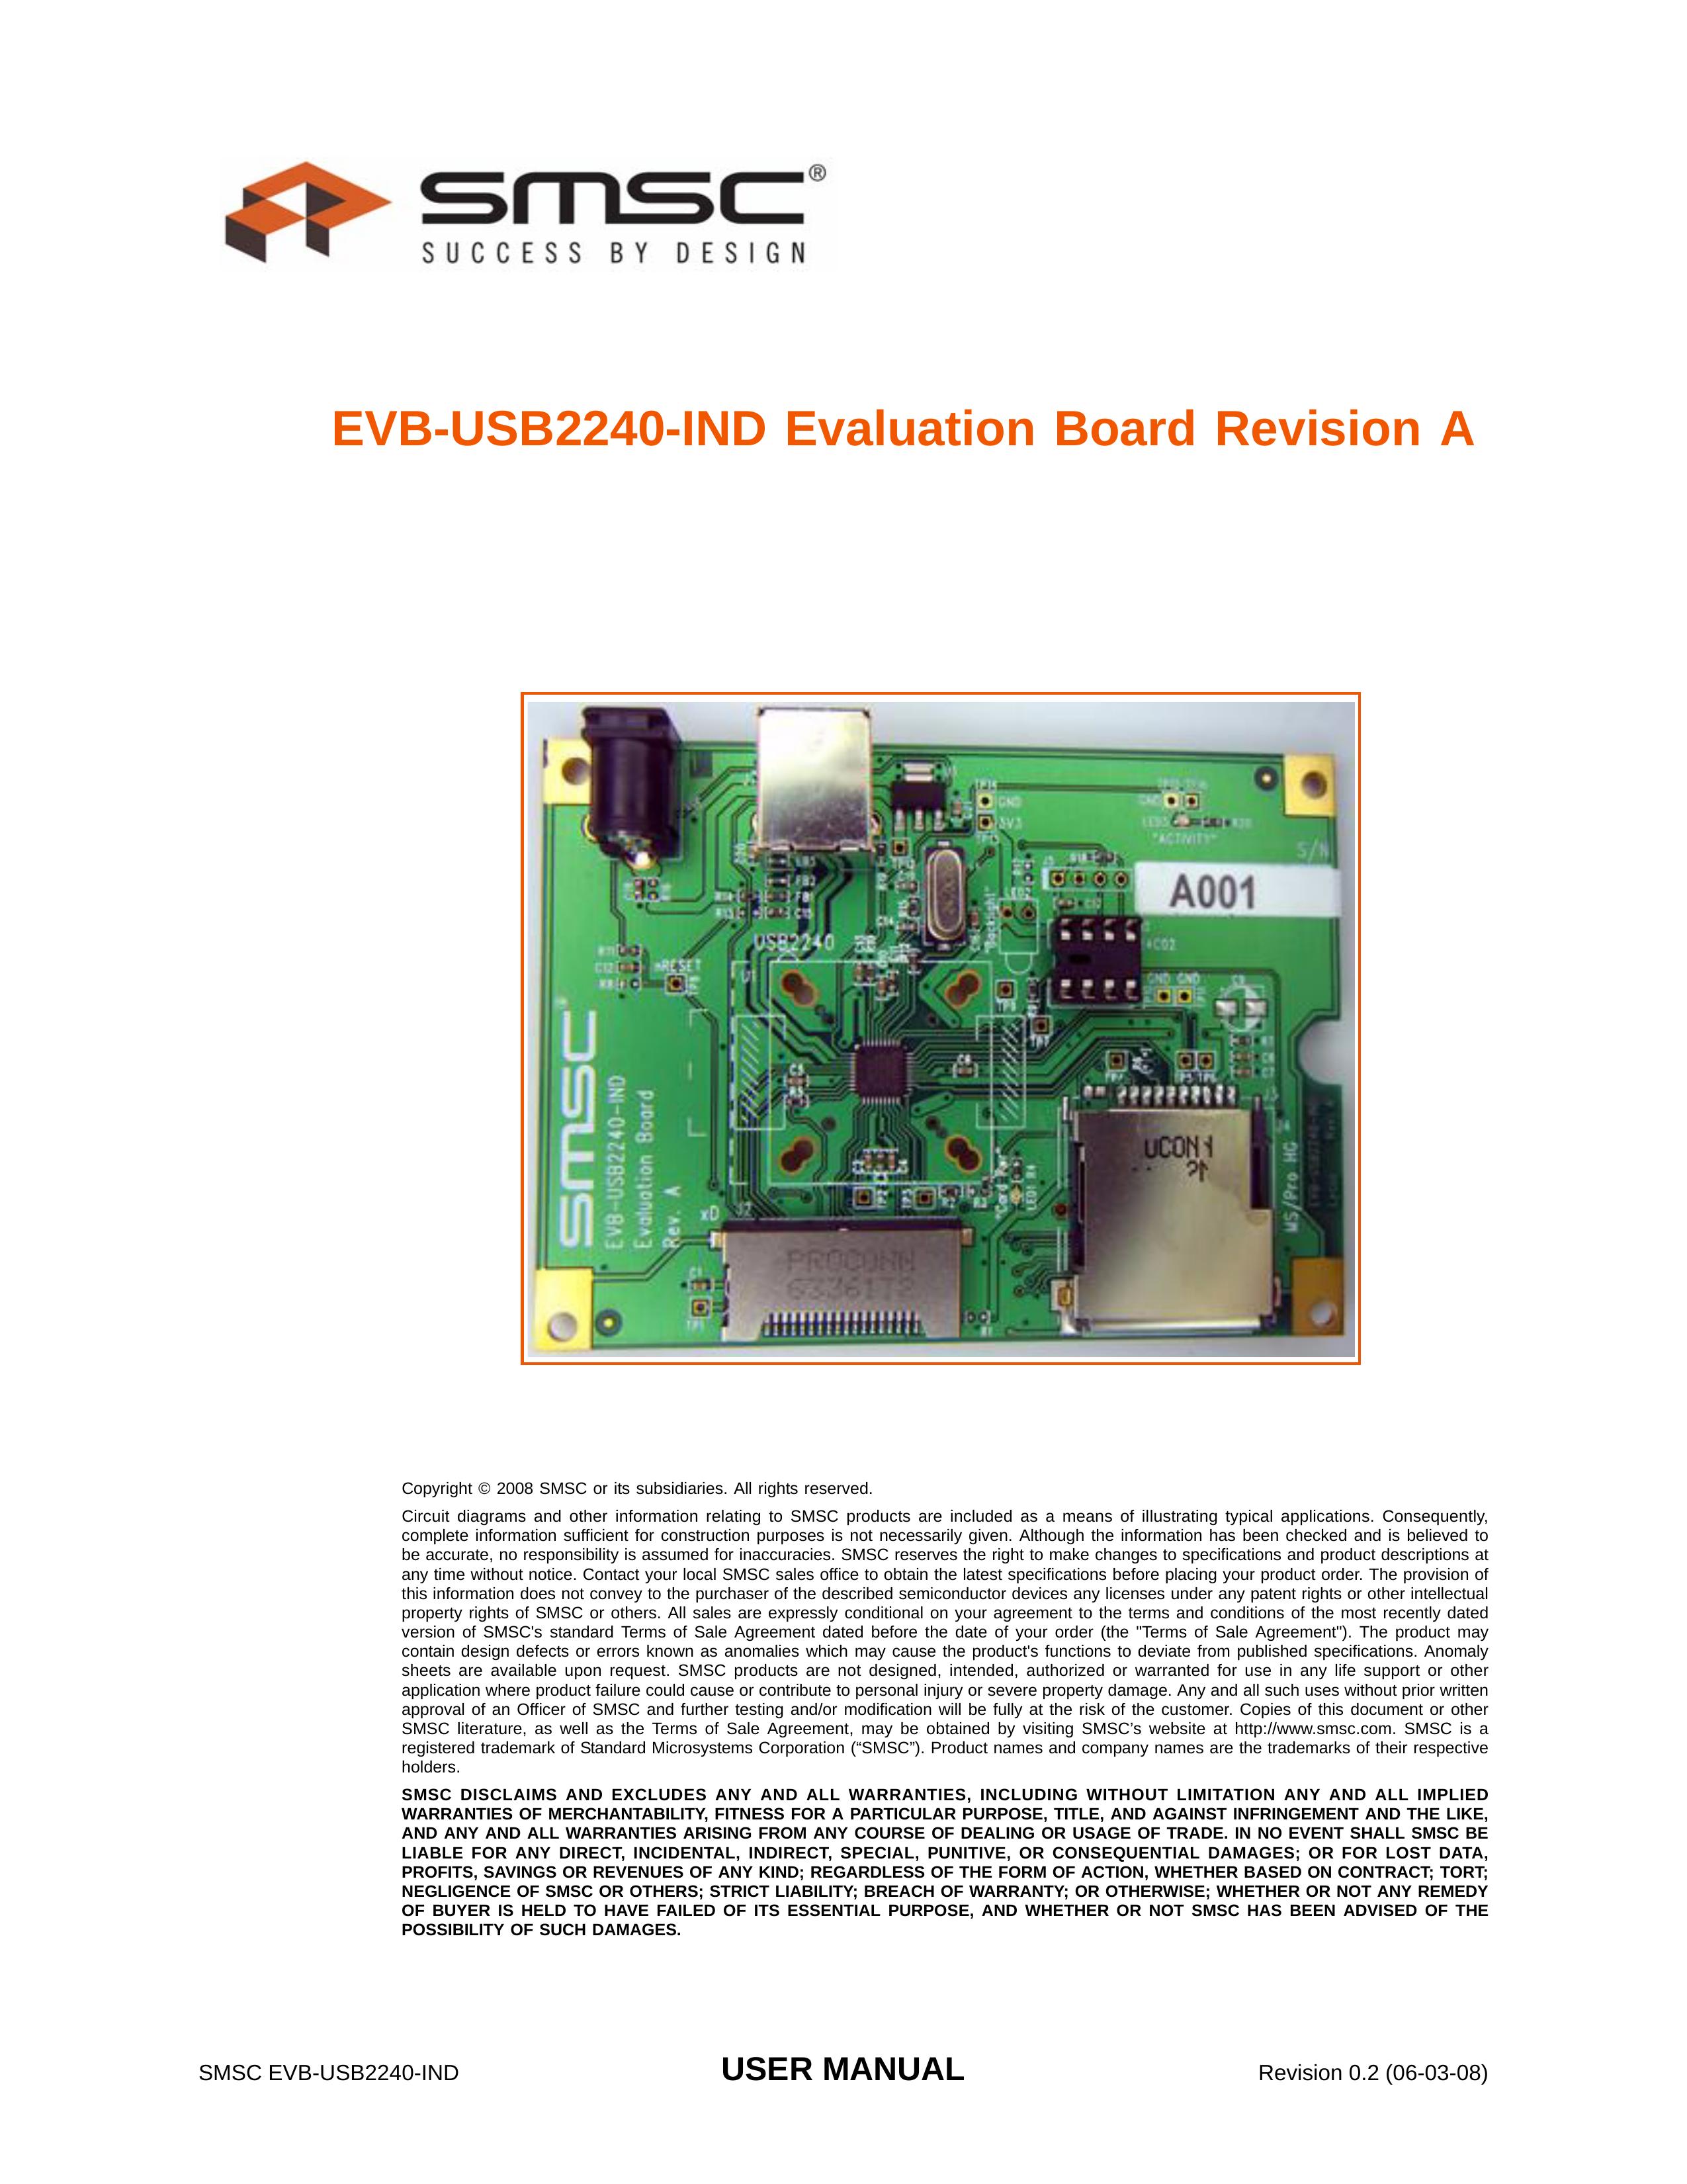 SMSC EVB-USB2240-IND Personal Lift User Manual